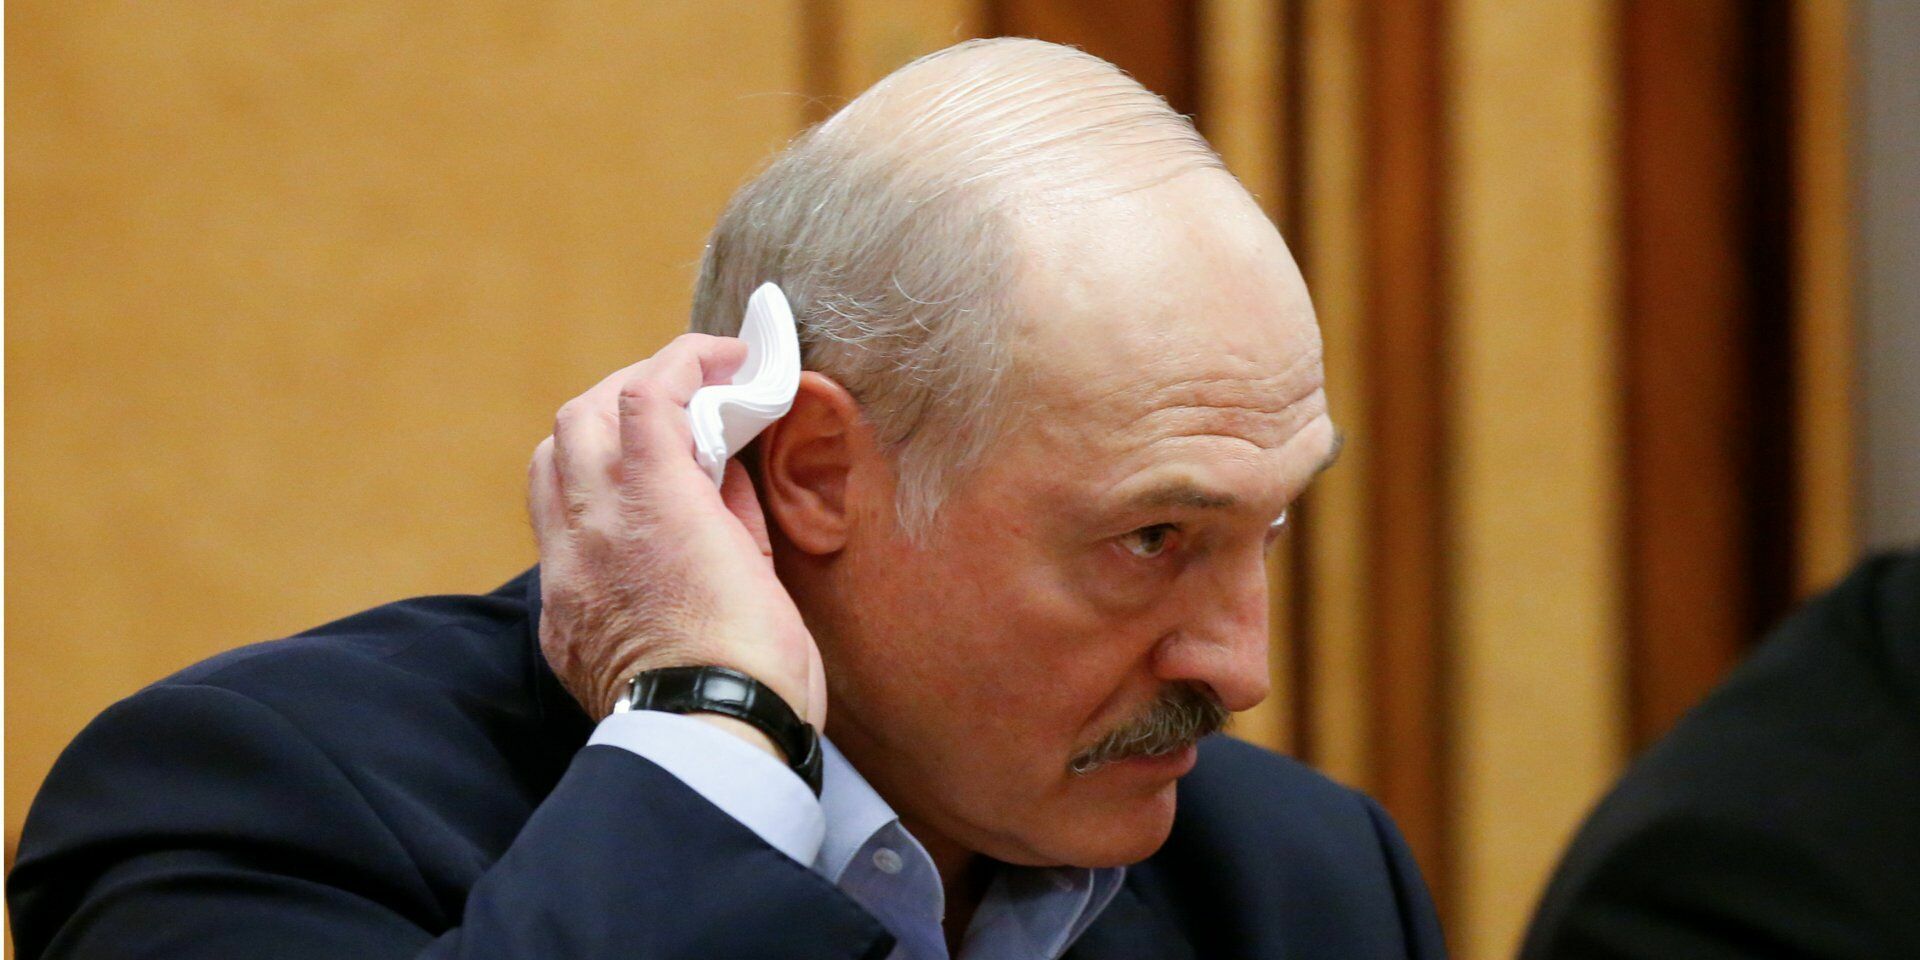 Lukashenko will lose legitimacy if he falsifies the election results again